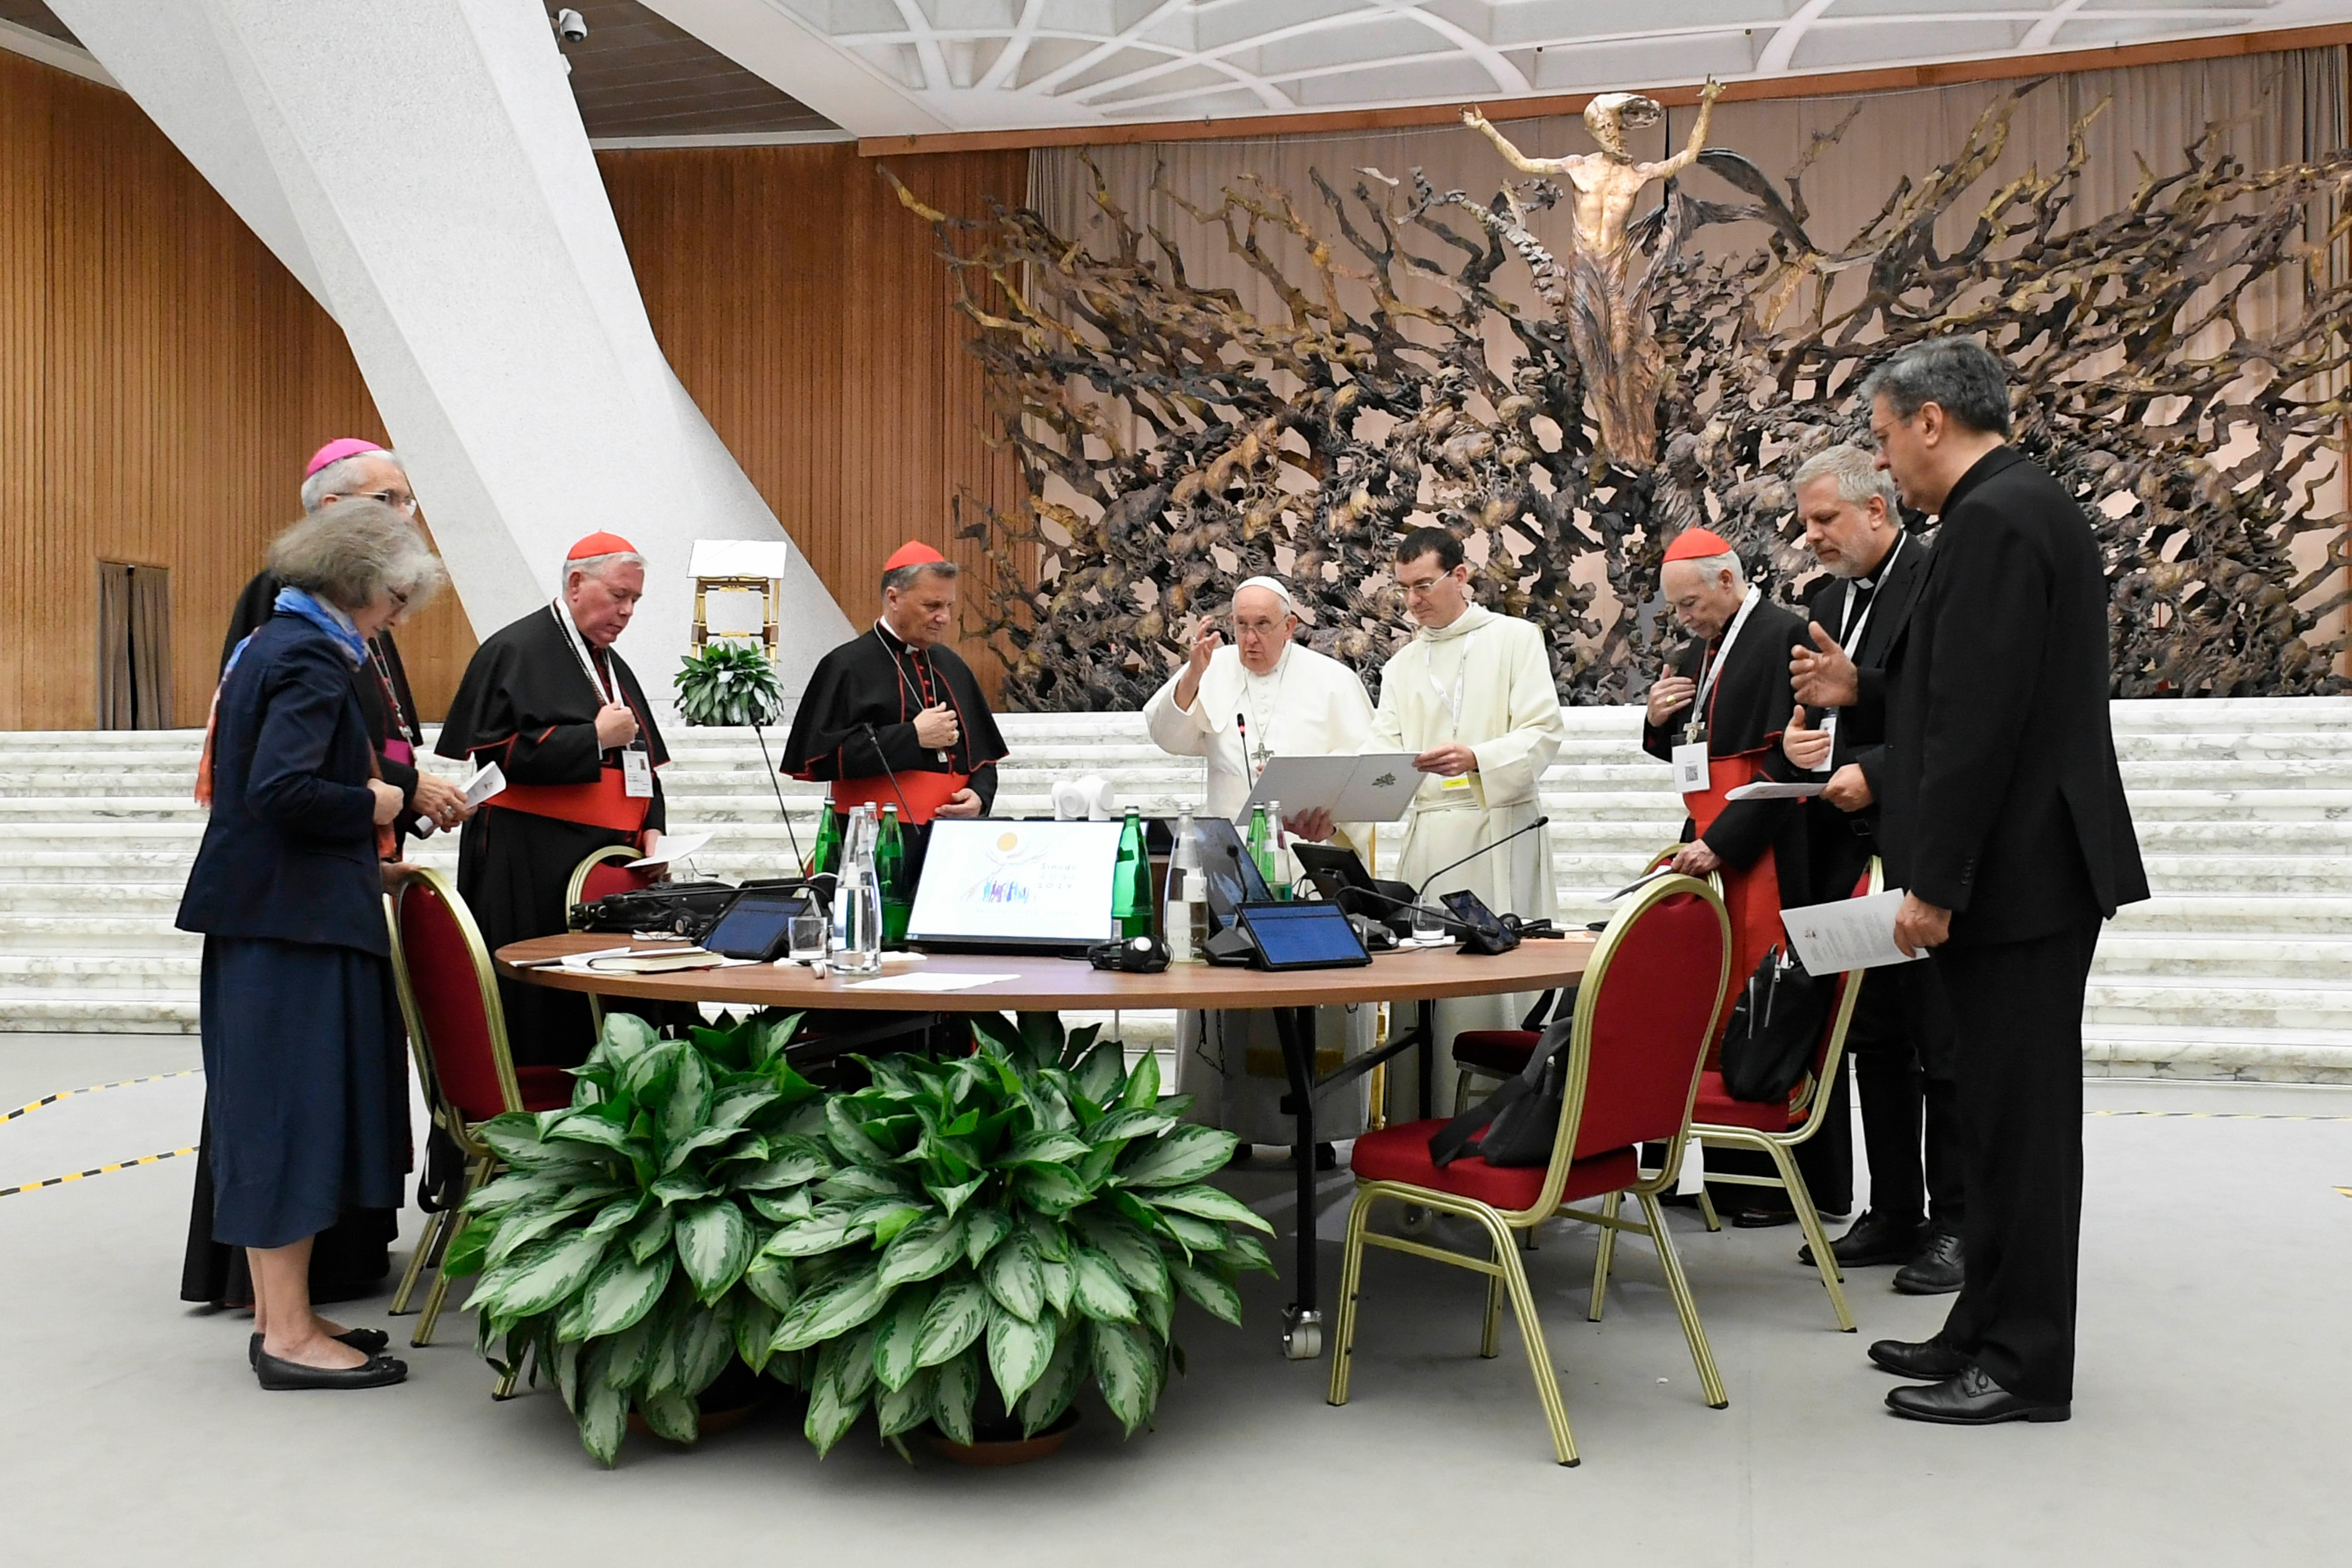 the Pope in a large conference room